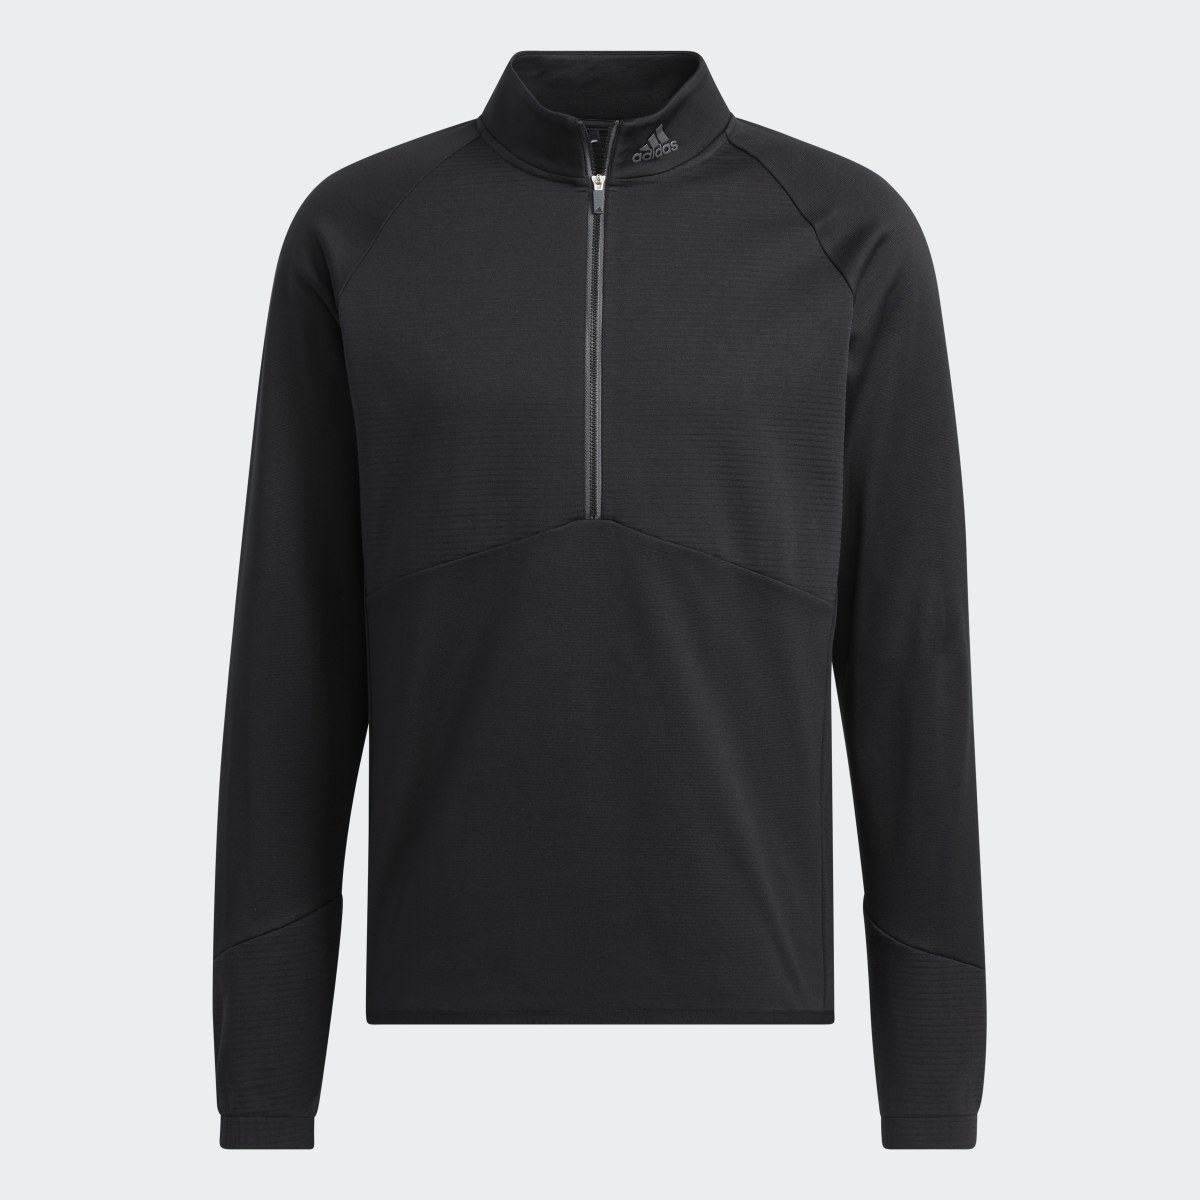 Adidas Pullover COLD.RDY 1/4-Zip. 5